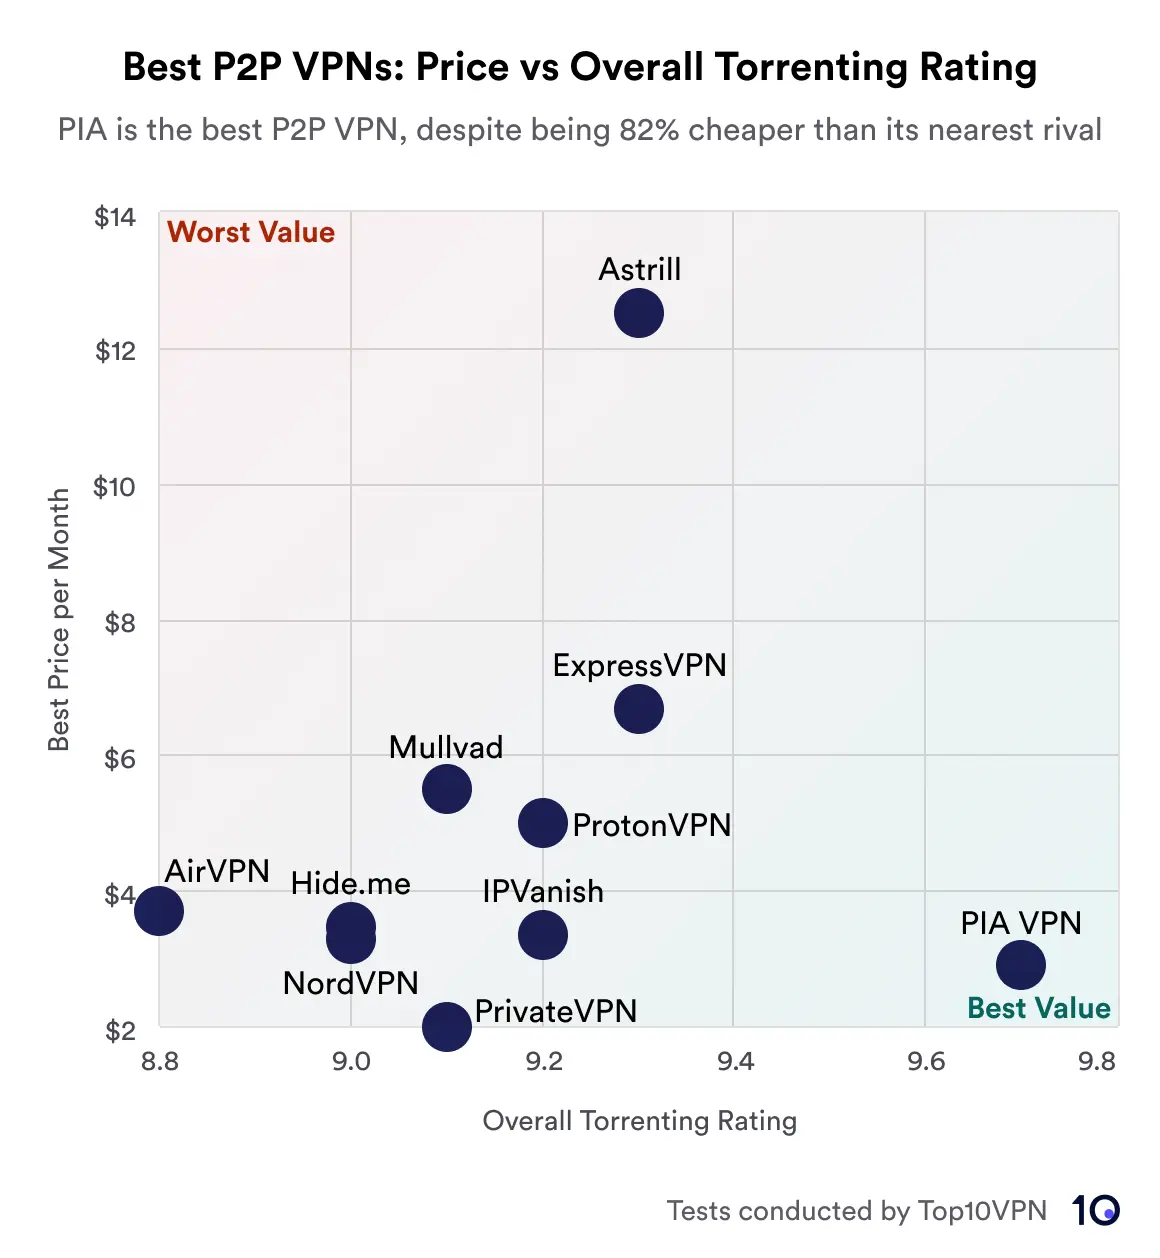 Scatter graph comparing 10 VPNs price against their overall torrenting rating. PIA VPN is highlighted as the best value, offering the highest rating at the lowest cost. Astrill is labeled as the worst value, with a high cost and lower rating. Other VPNs like NordVPN, ExpressVPN, and ProtonVPN are in the mid-range for both price and rating.